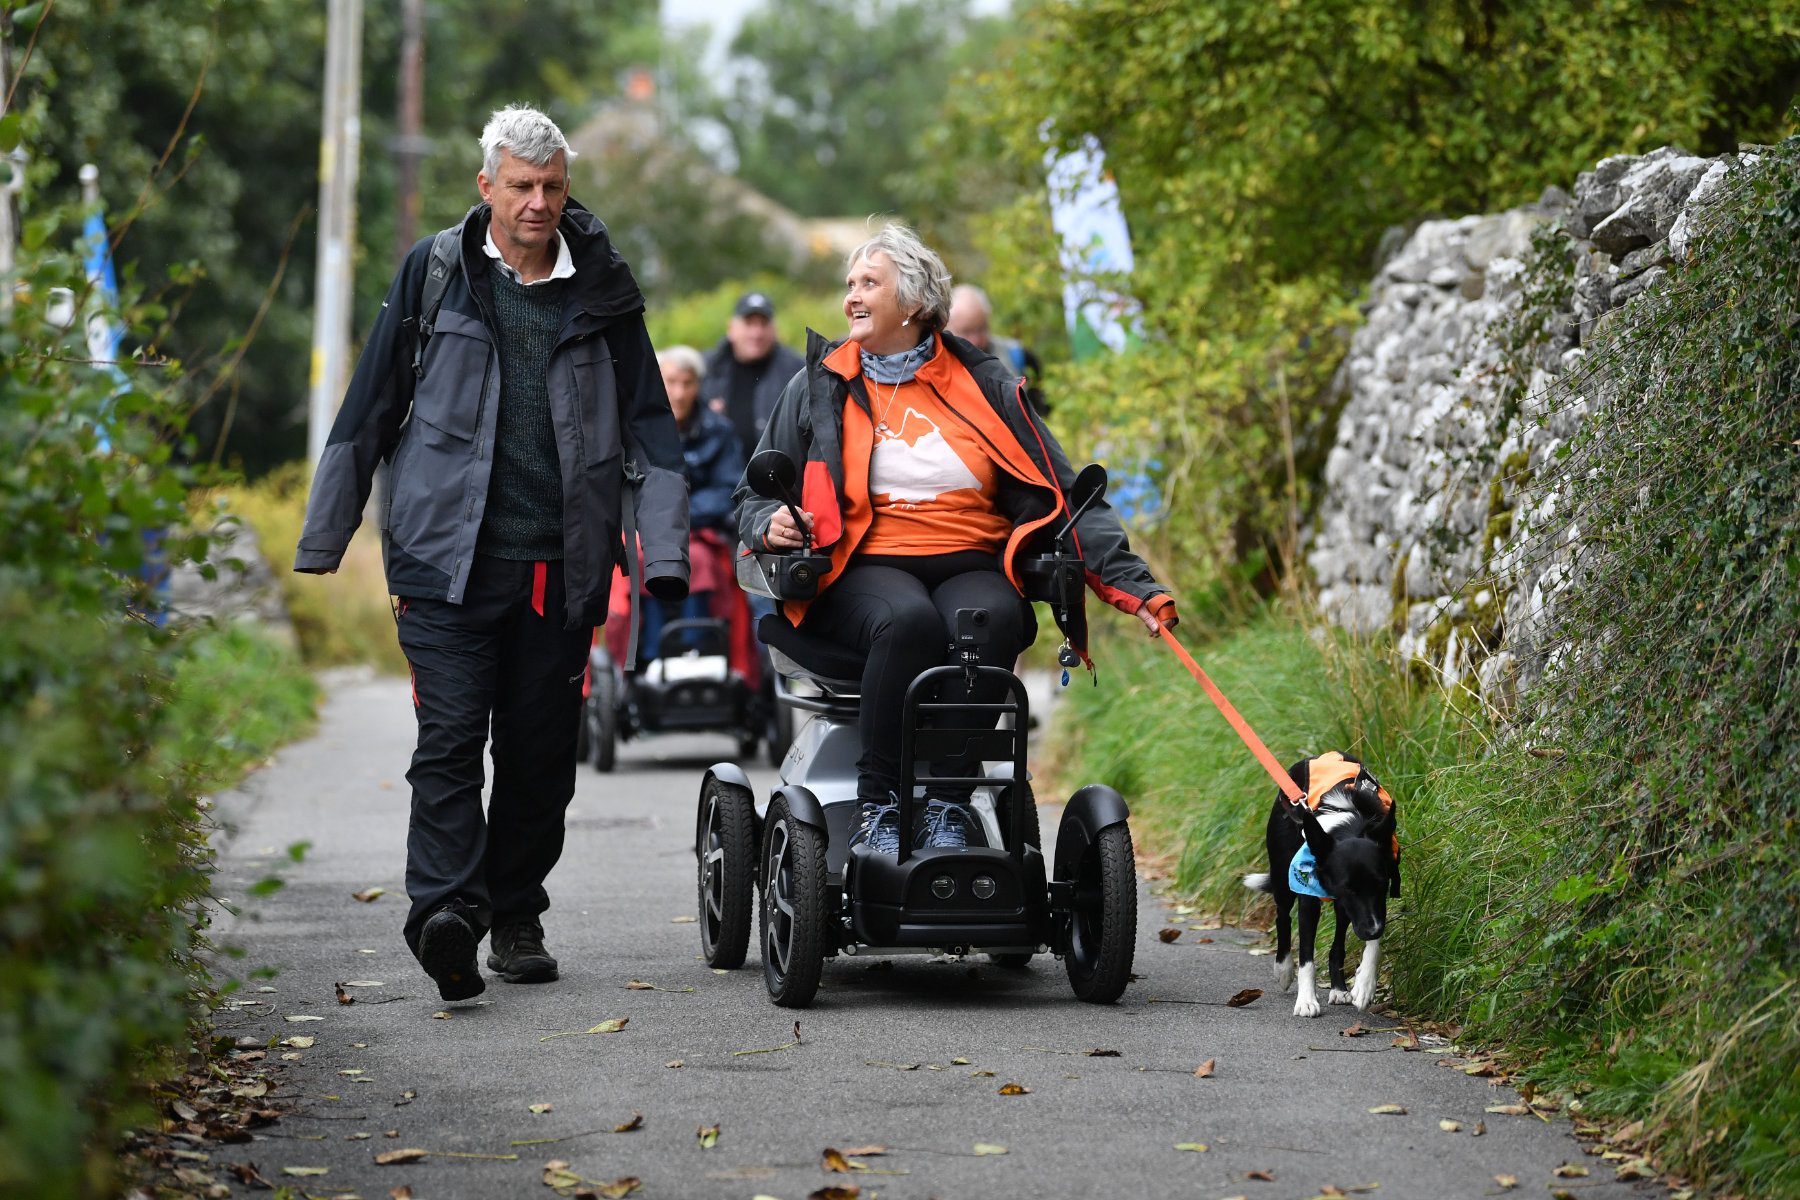 Wheelchair user with a dog walking through countryside